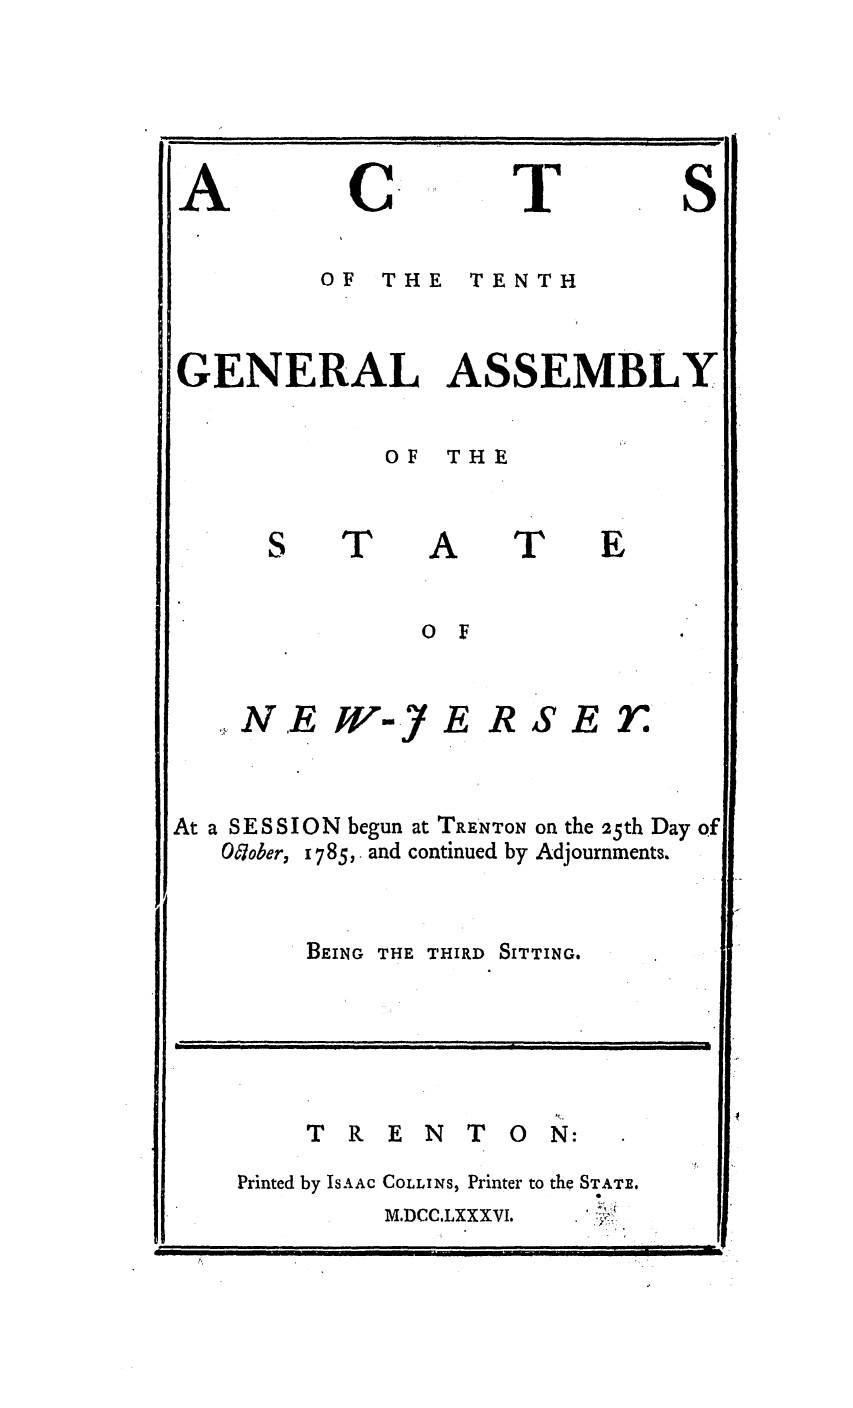 handle is hein.ssl/ssnj0244 and id is 1 raw text is: A

C

T

S

OF  THE  TENTH
GENERAL ASSEMBLY
OF THE

T

A

T

E

N.E

WV-J) E

RSE

7n

At a SESSION begun at TRE'NTON on the !25th Day of
O'tober, 1785, and continued by Adjournments.
BEING THE THIRD SITTING.

T R E N T O N:

Printed by ISAAC

COLLINS, Printer to the STATE.
M.DCC.LXXXVI.

i                                      I       II|       I                        I  I               '  II  I   i          I                  II                  III


